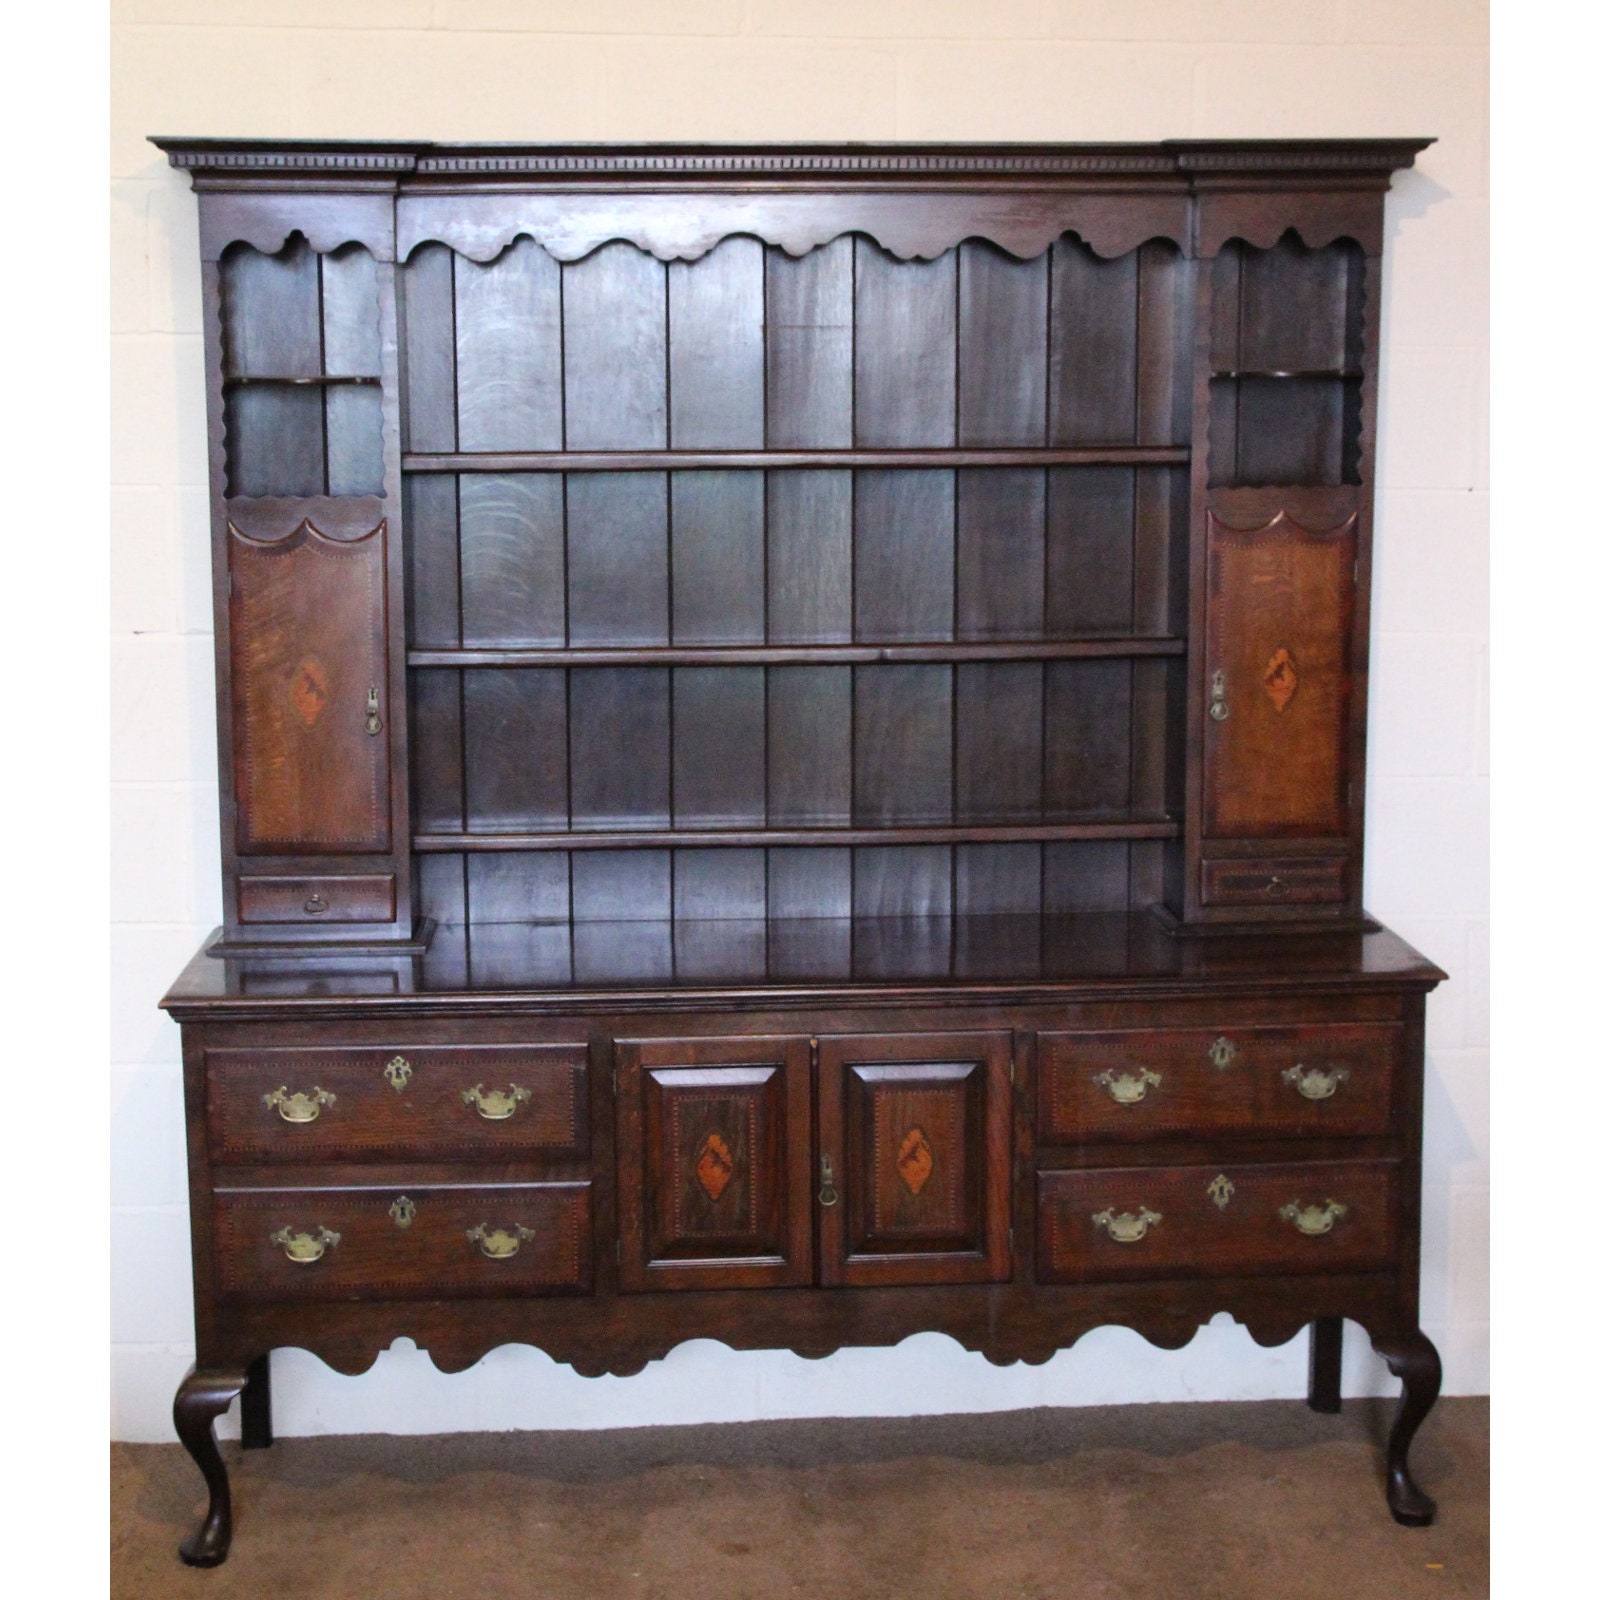 A Quality Victorian Inlaid Oak Kitchen Dresser Or Sideboard Etsy